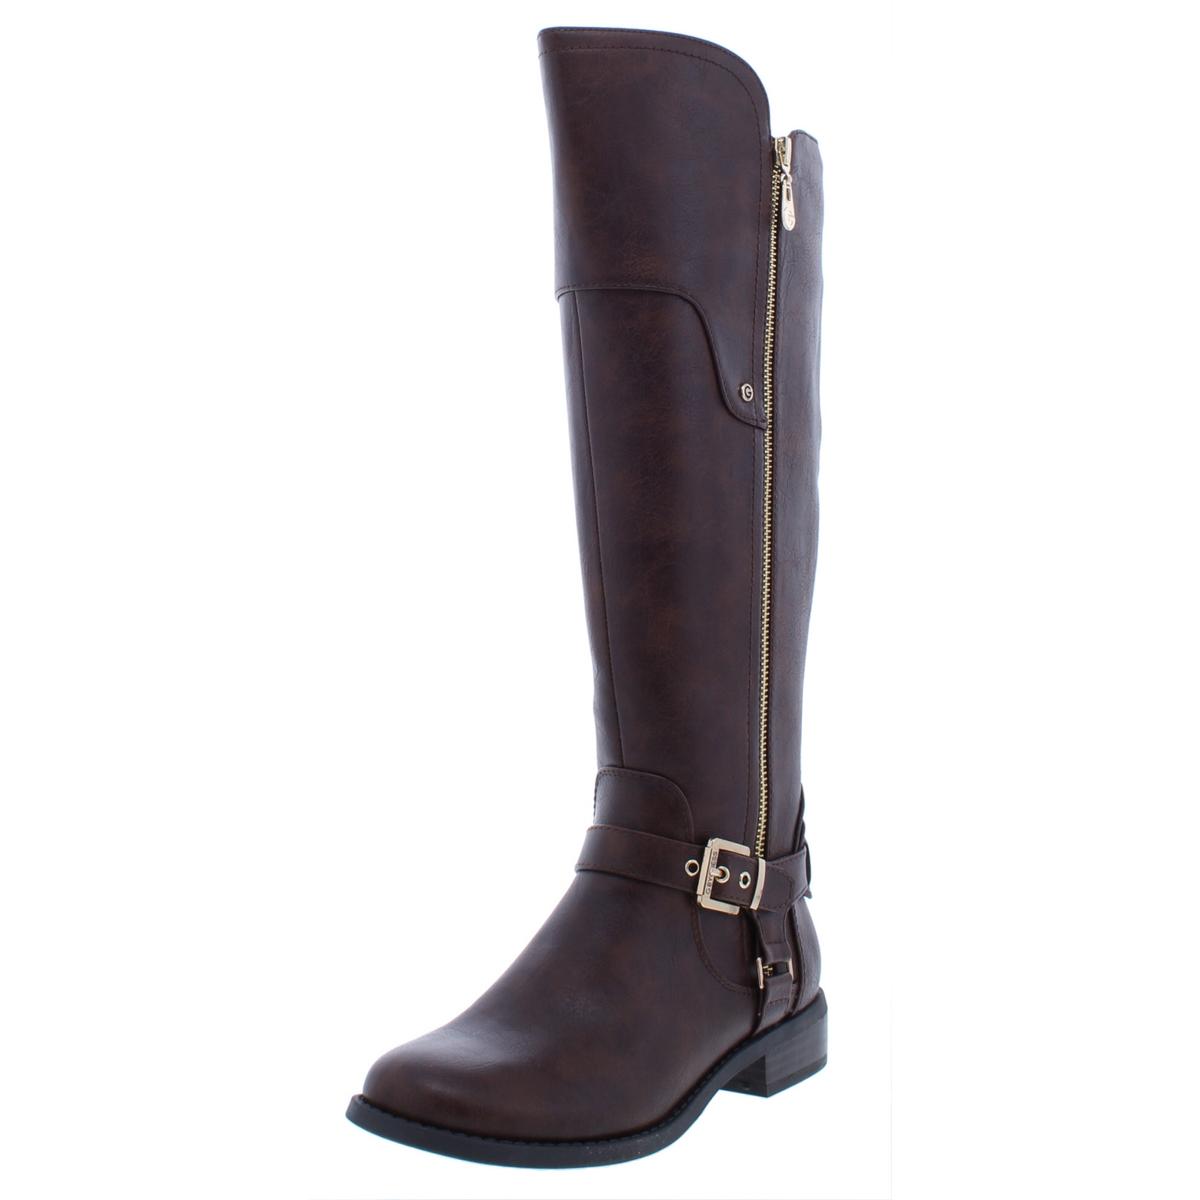 G by Guess Womens Harson Brown Knee-High Boots Shoes 7 Medium (B,M ...